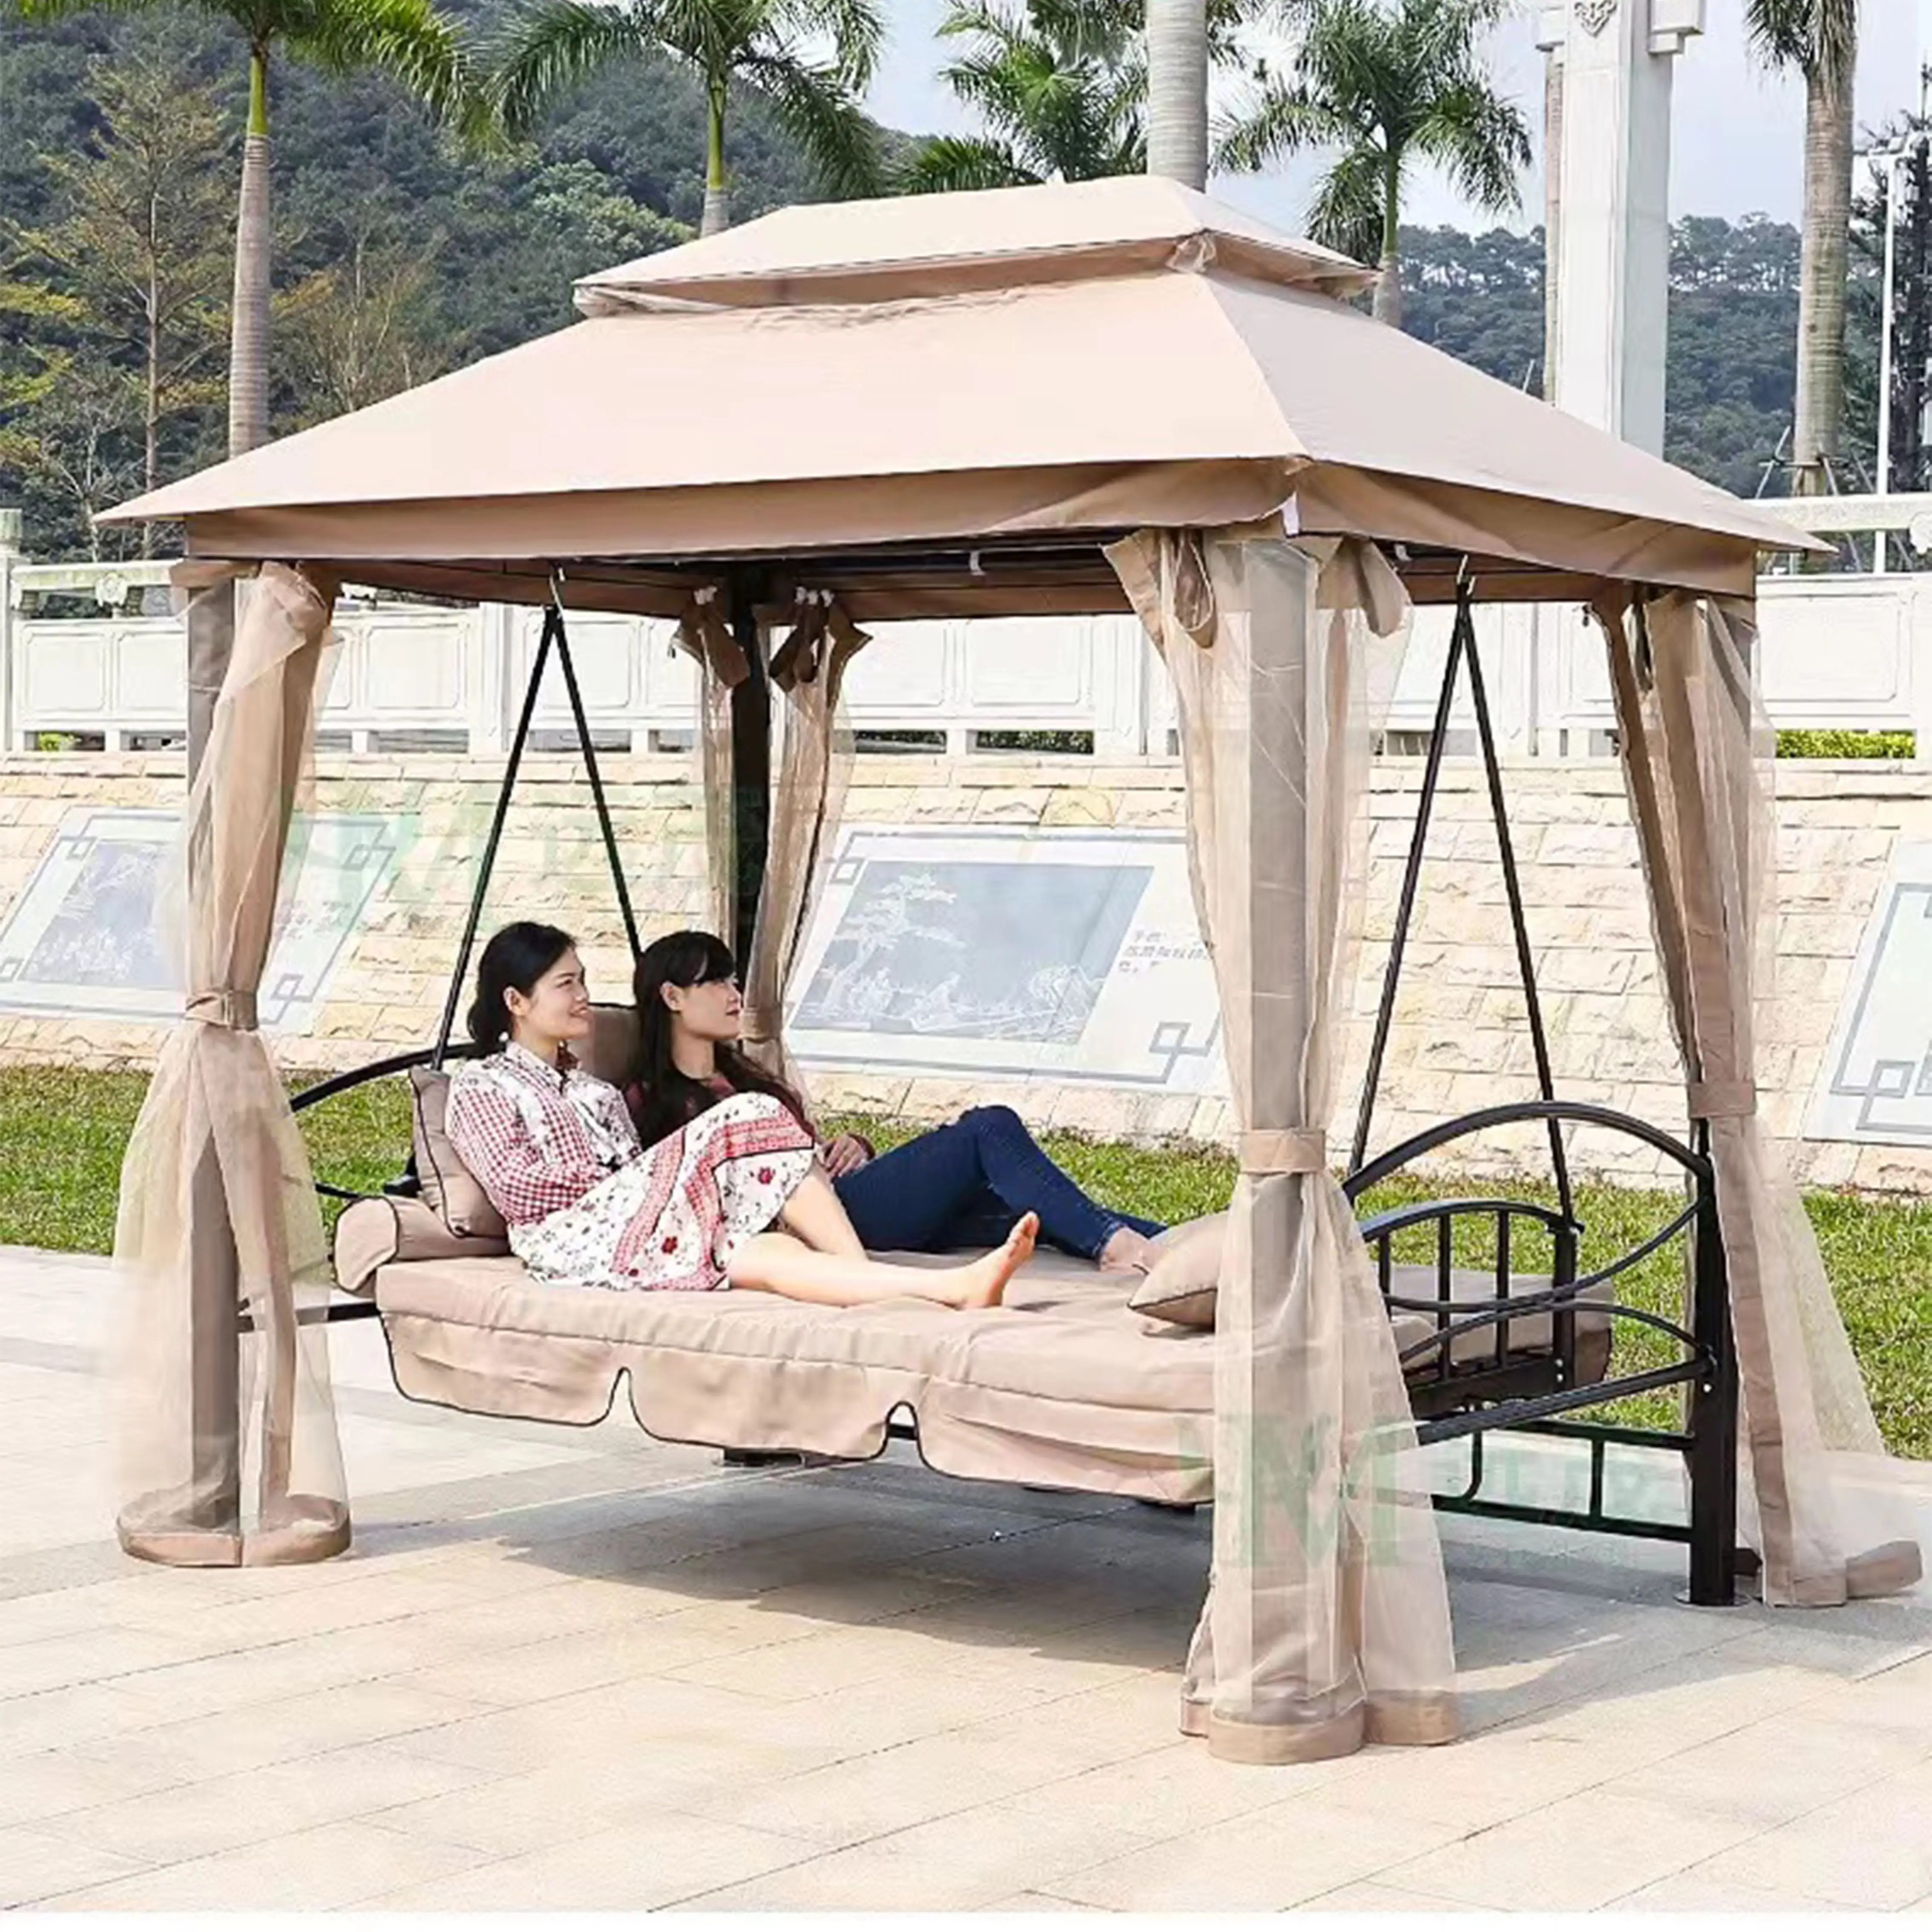 High quality Outdoor Garden Big Huge swing chair adult 3 Person Porch Swing Bed with Mosquito nets